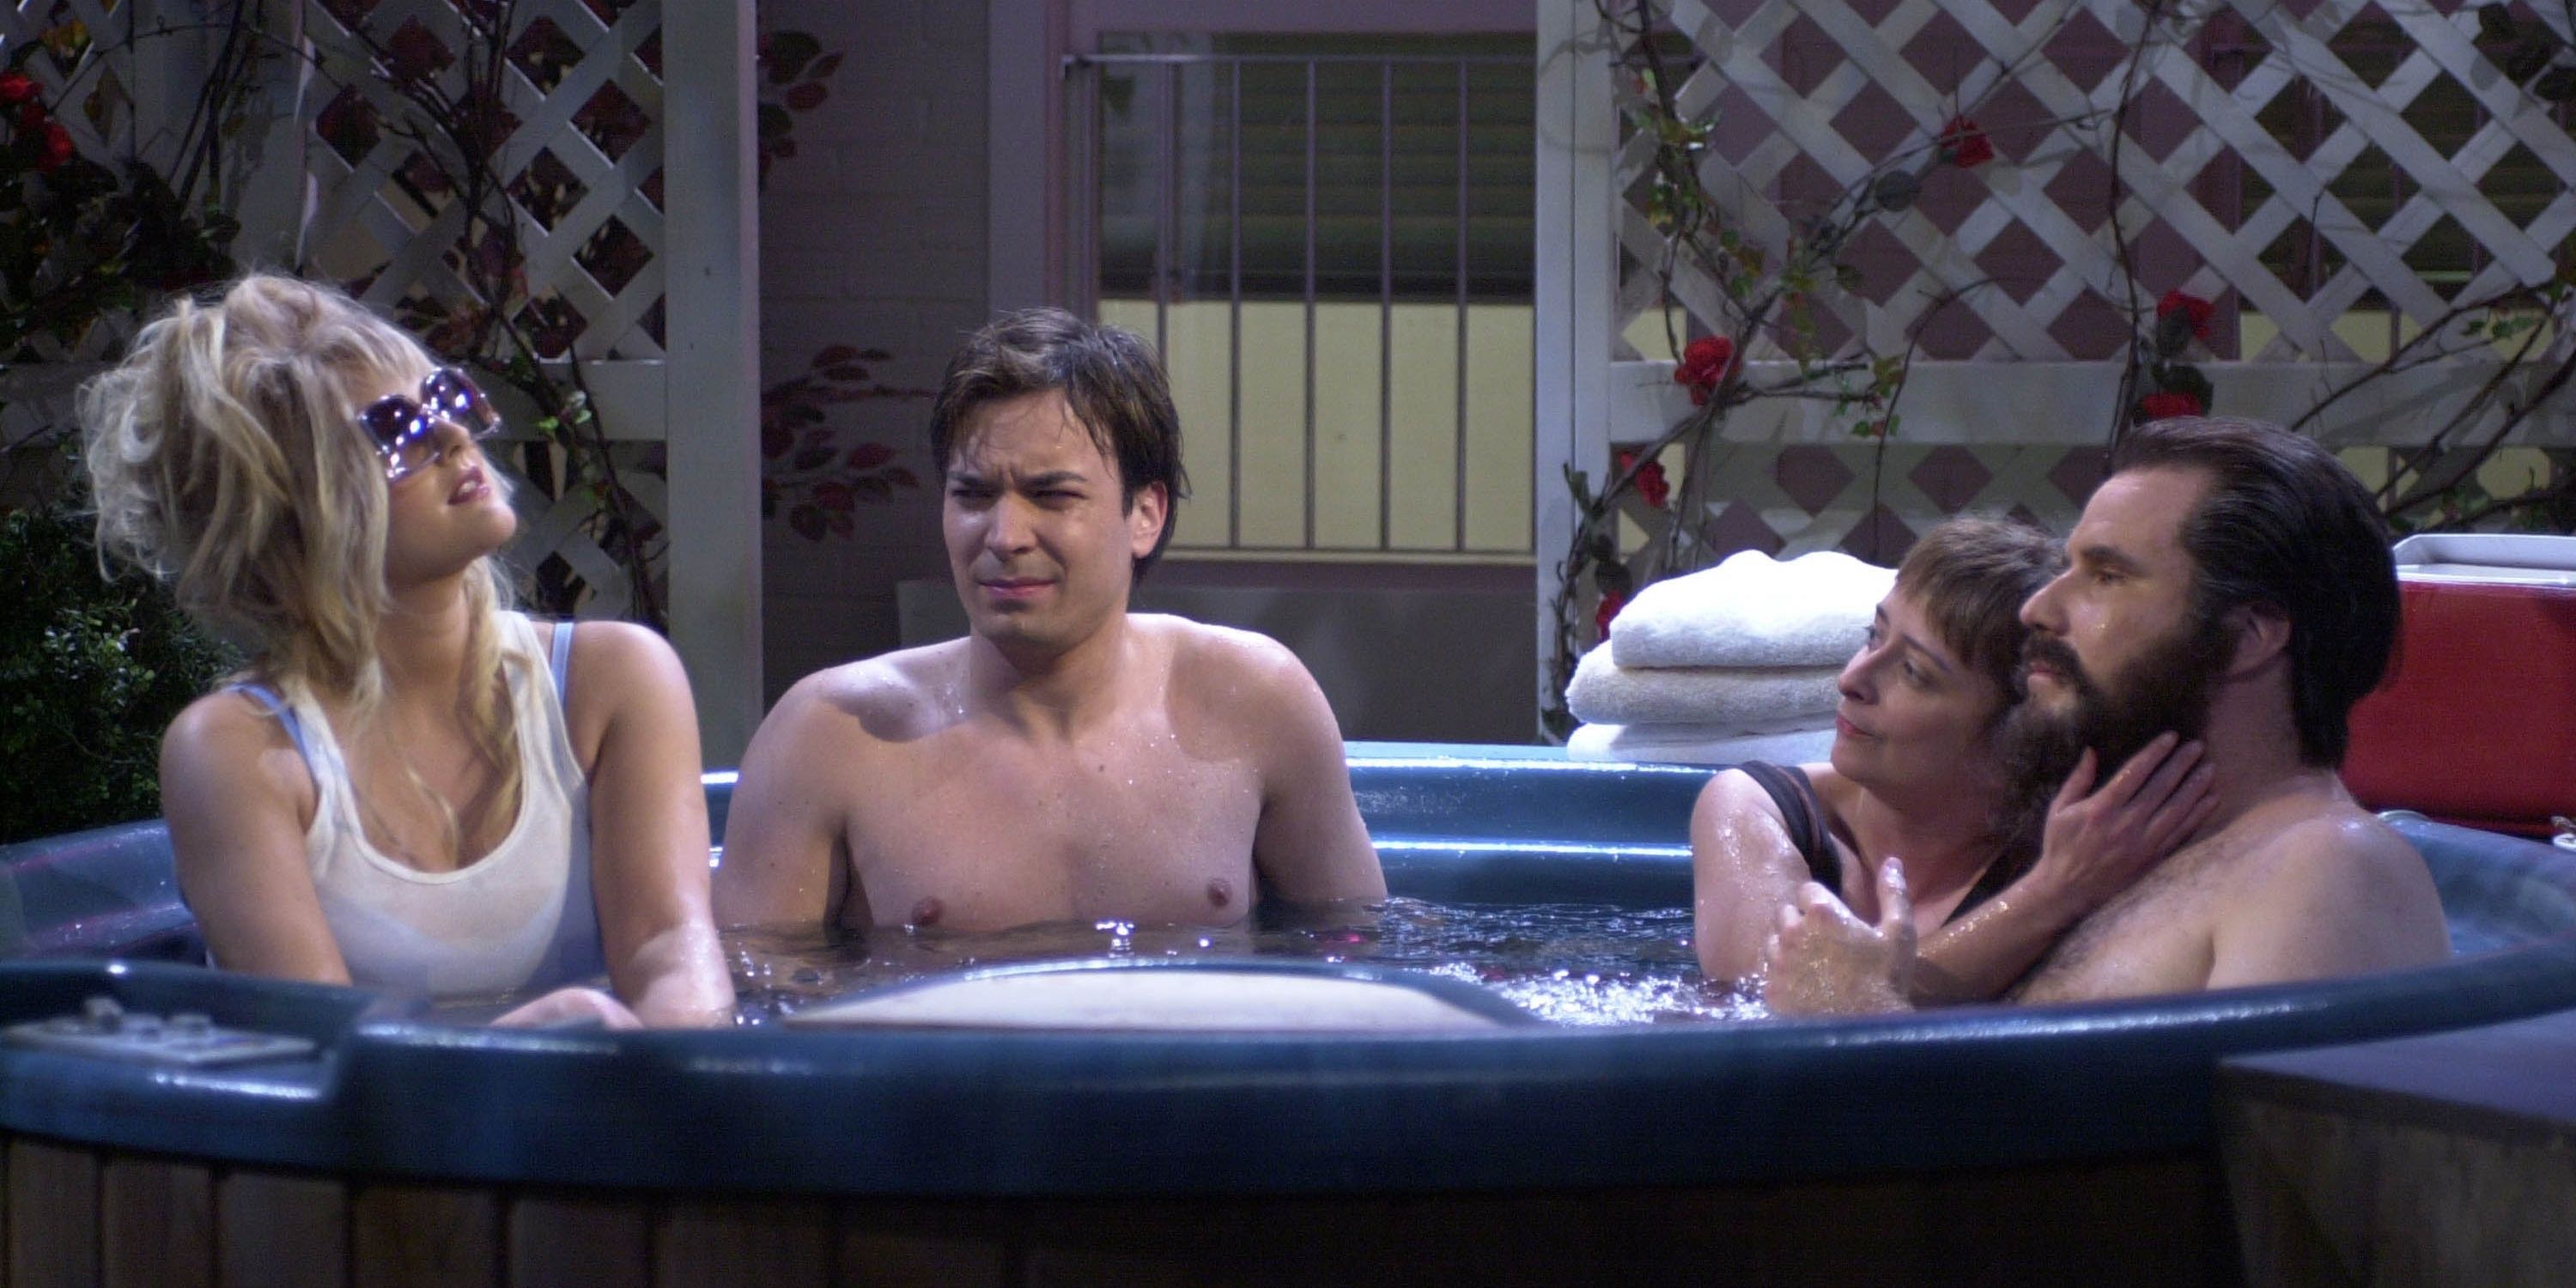 Lov-ahs sketch with Jimmy Fallon, Drew Barrymore, Roger and Virginia Clarvin